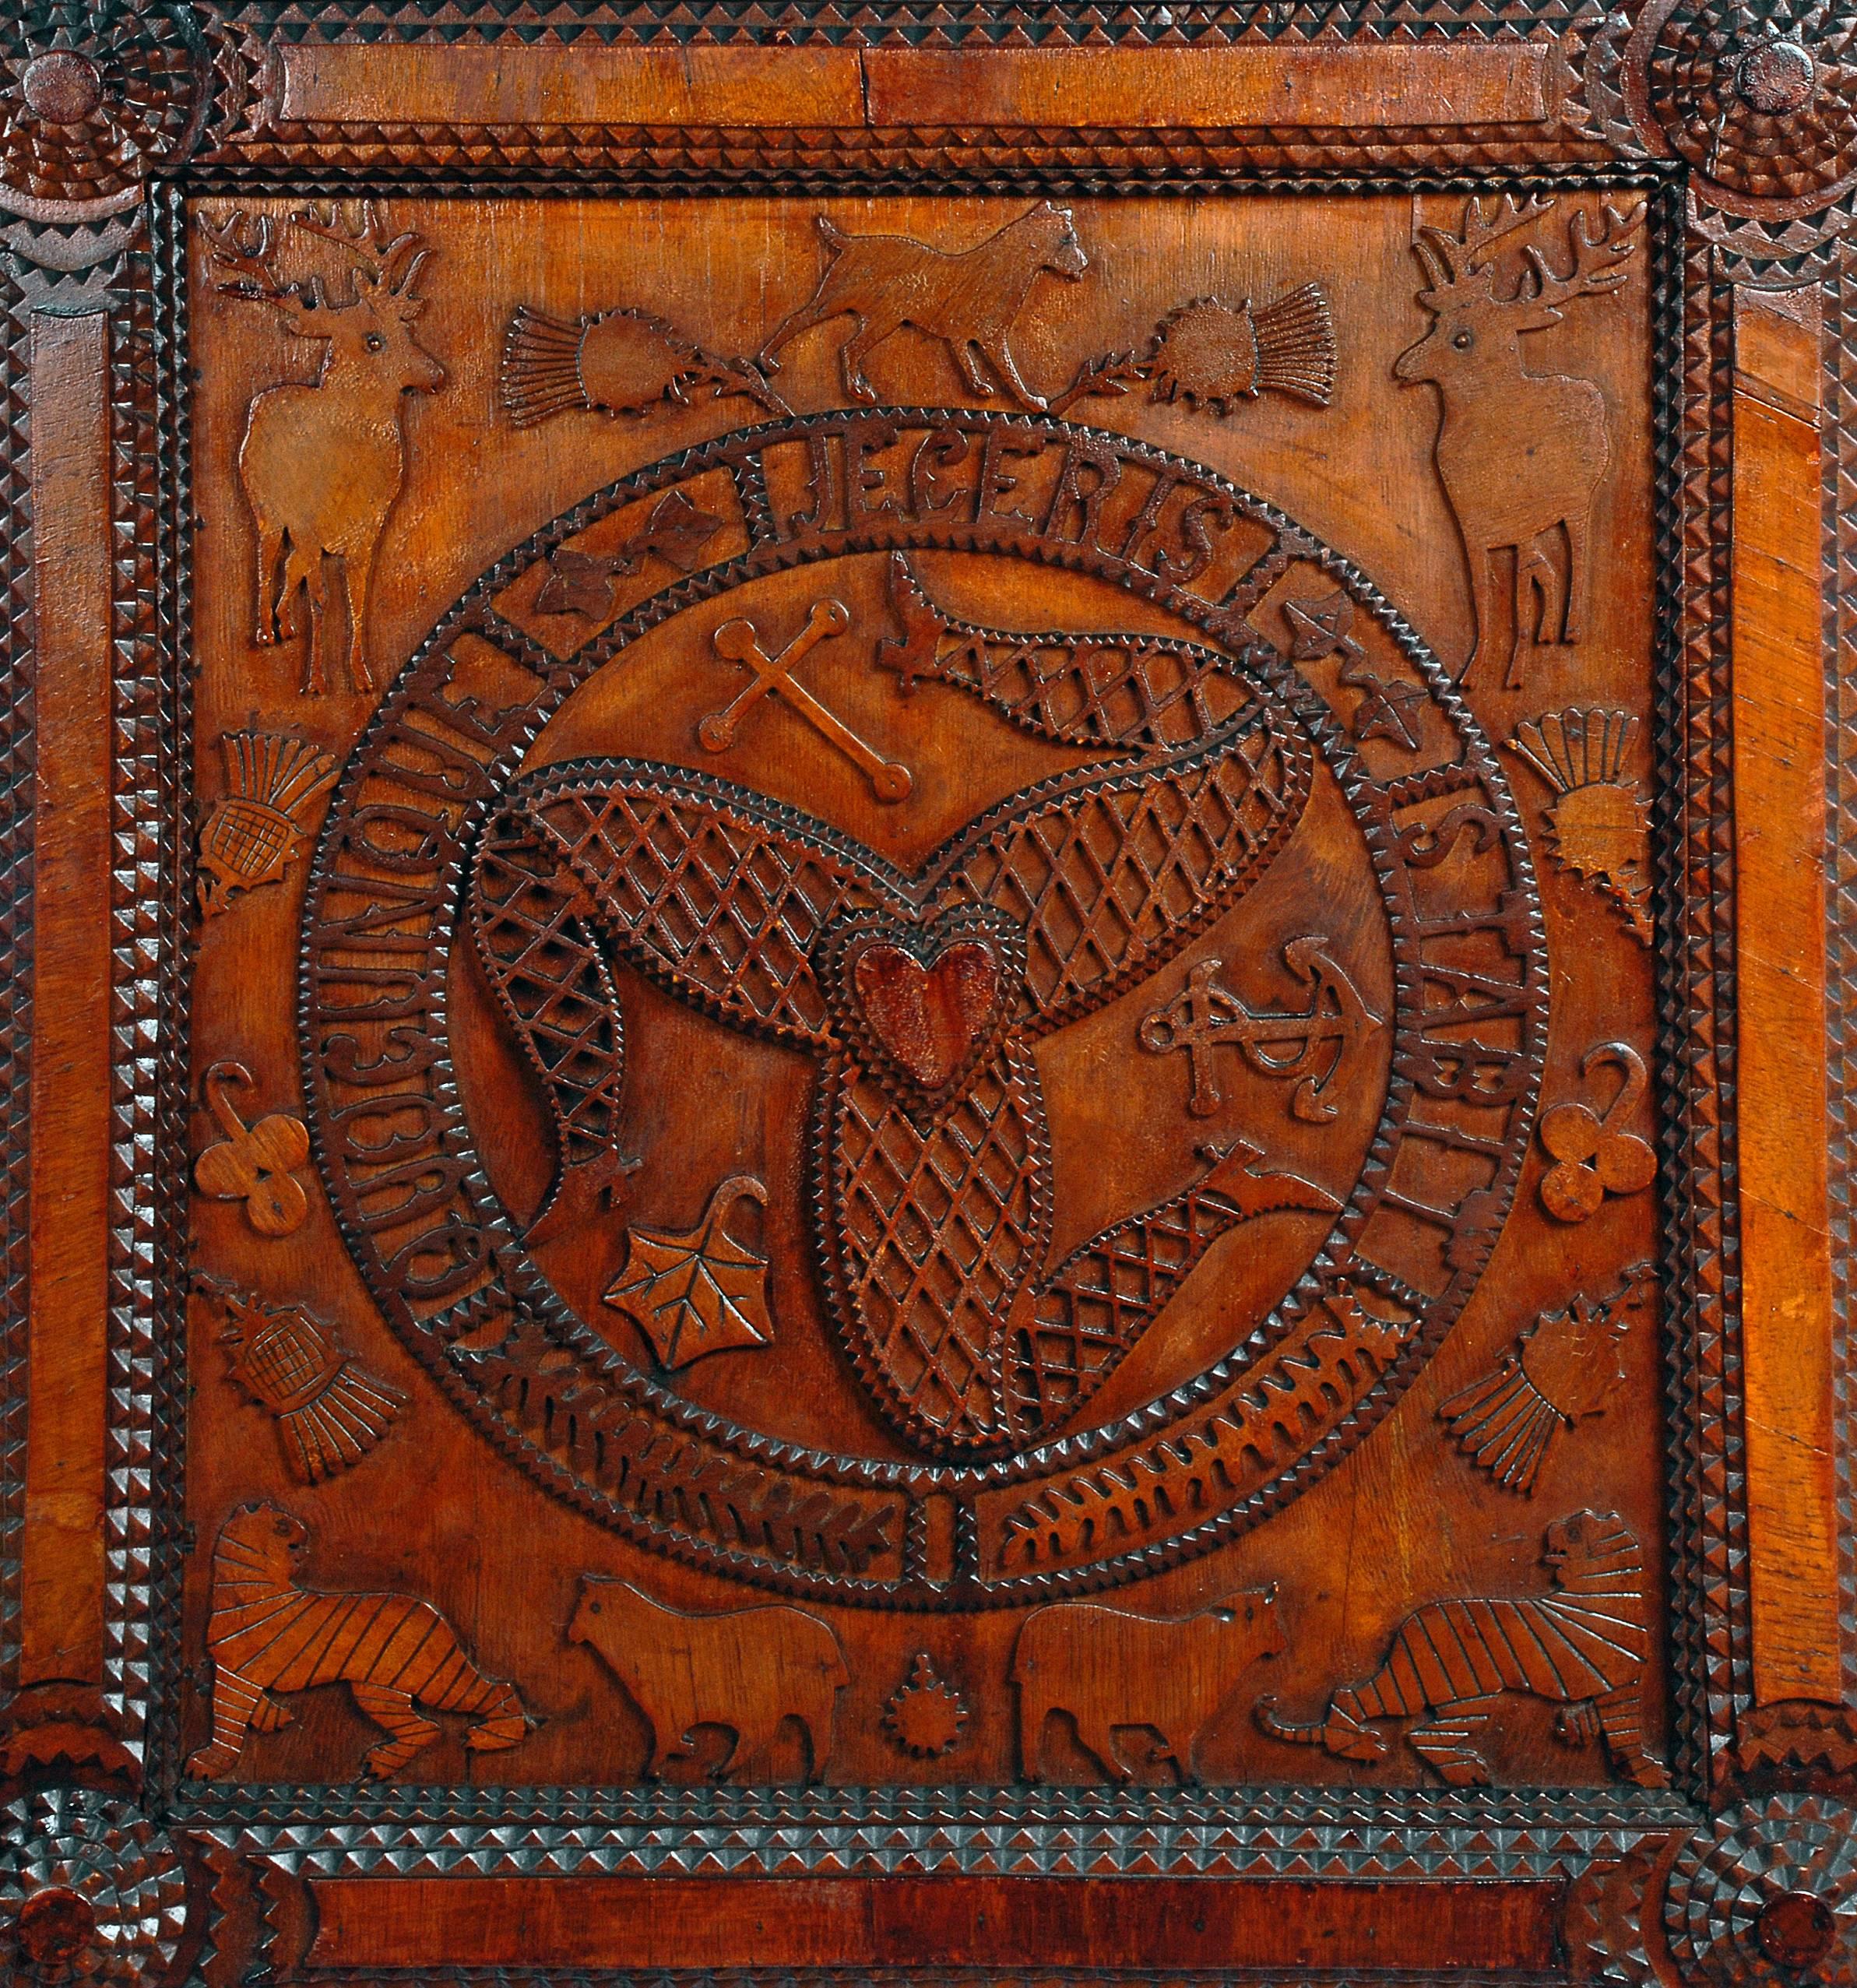 An unusual heavily symbolic tramp art carved plaque depicting the coat of arms of the Isle of Man, with the Latin phrase Quocunque Jeceris Stabit (whichever way you throw it, it will stand), with applied stag, thistle, tiger, Manx (a breed of cat